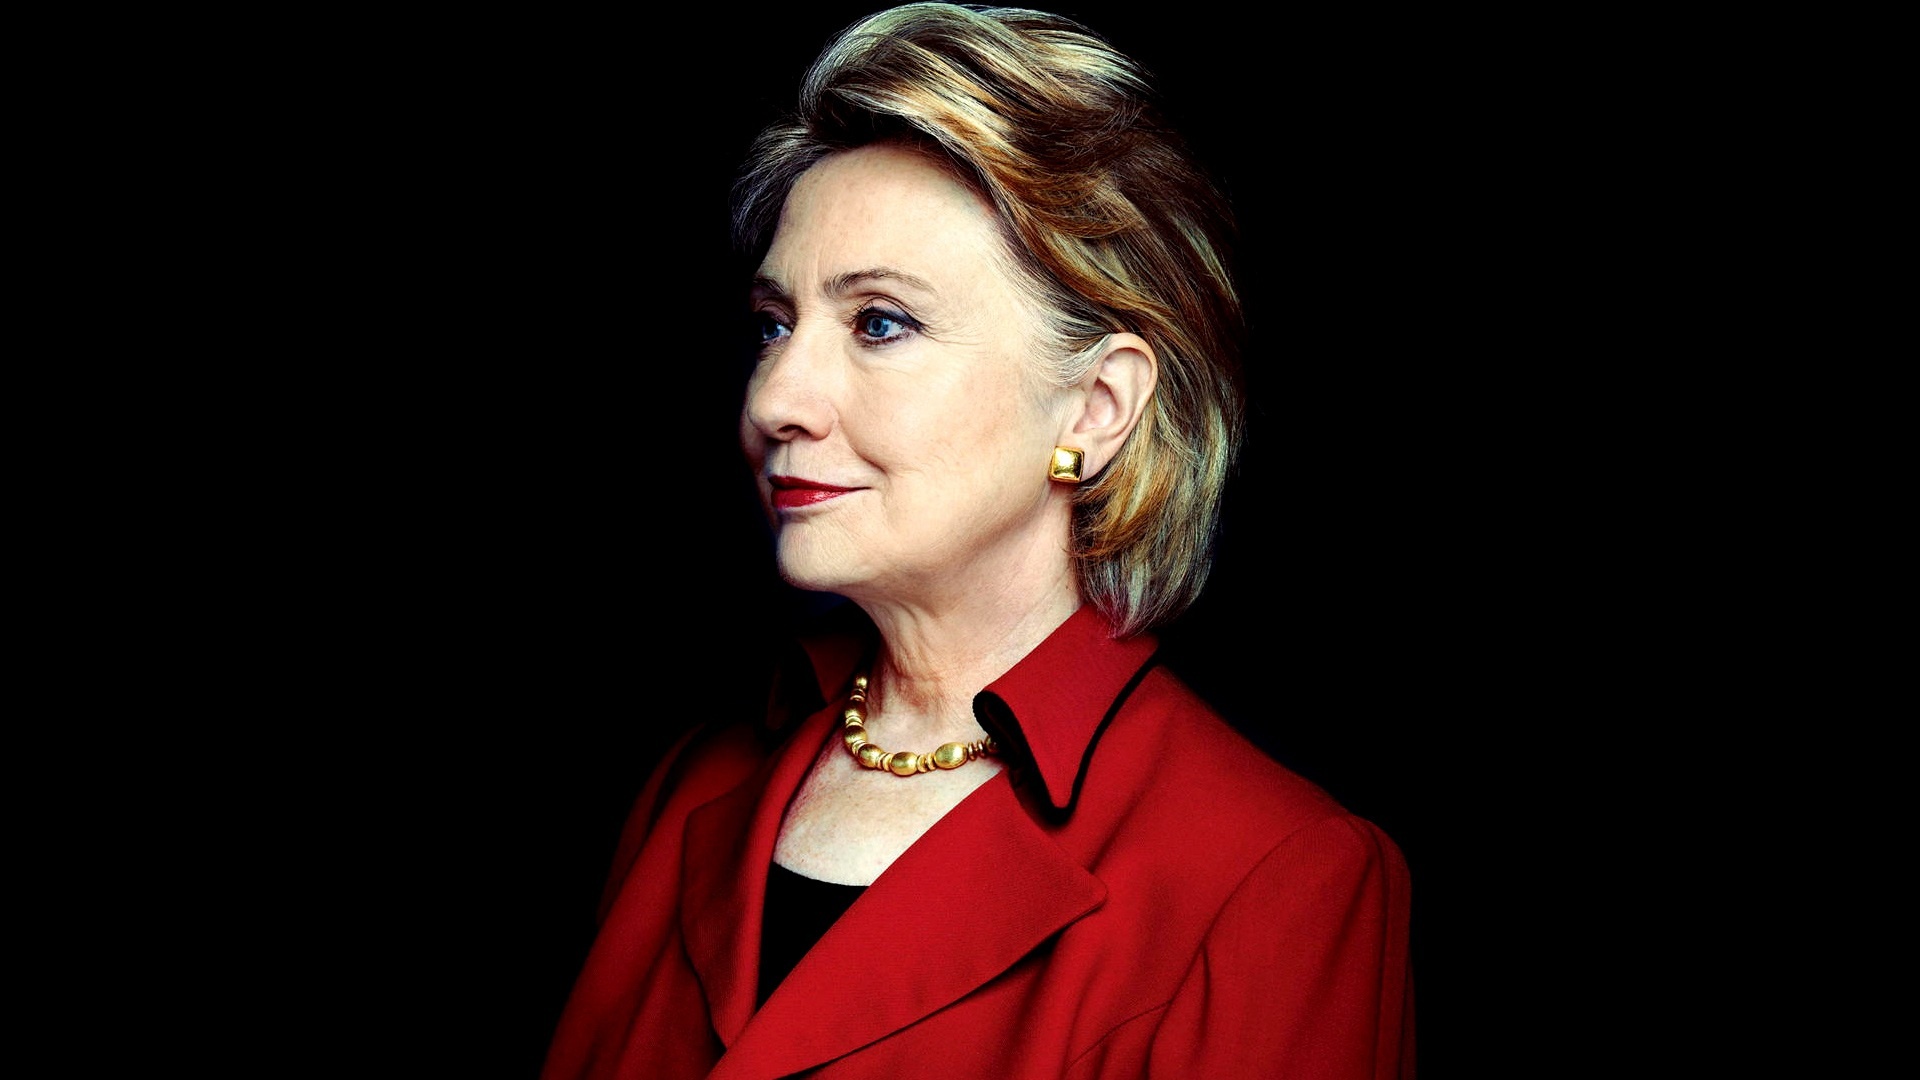 Hillary Clinton, Variety of wallpapers, Numerous choices, Personal style, 1920x1080 Full HD Desktop